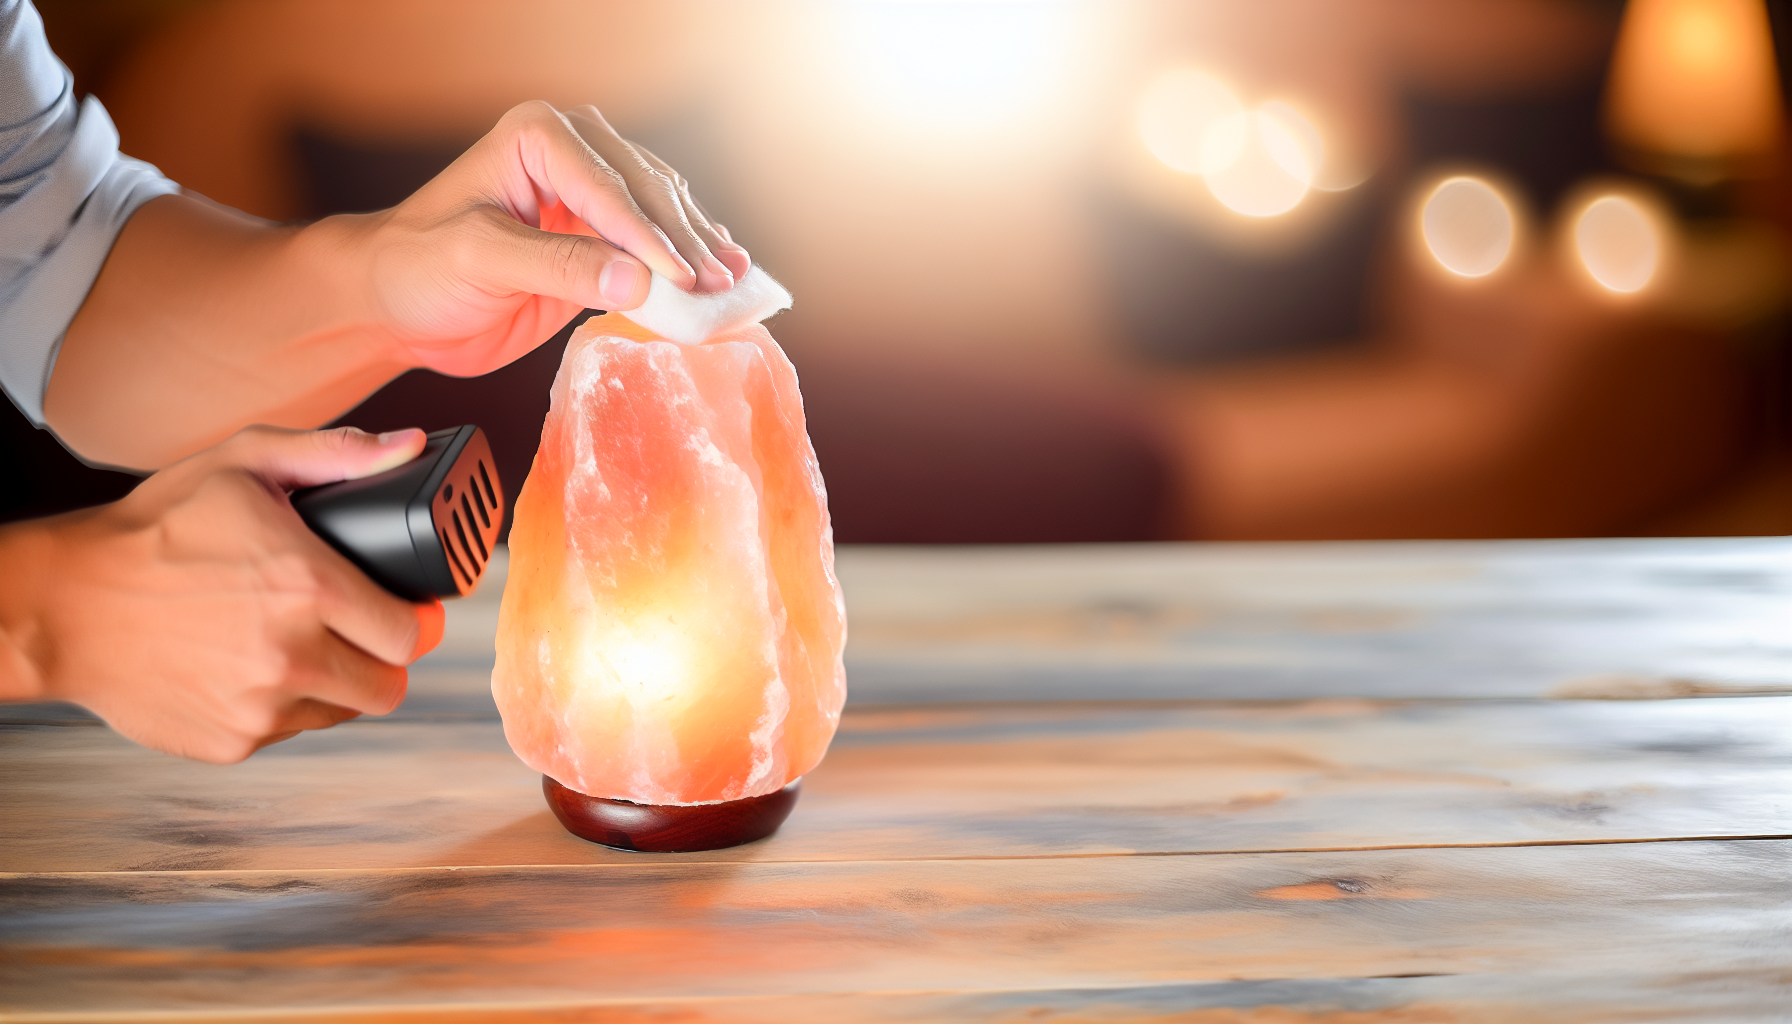 Hands cleaning a white Himalayan salt lamp with a soft cloth